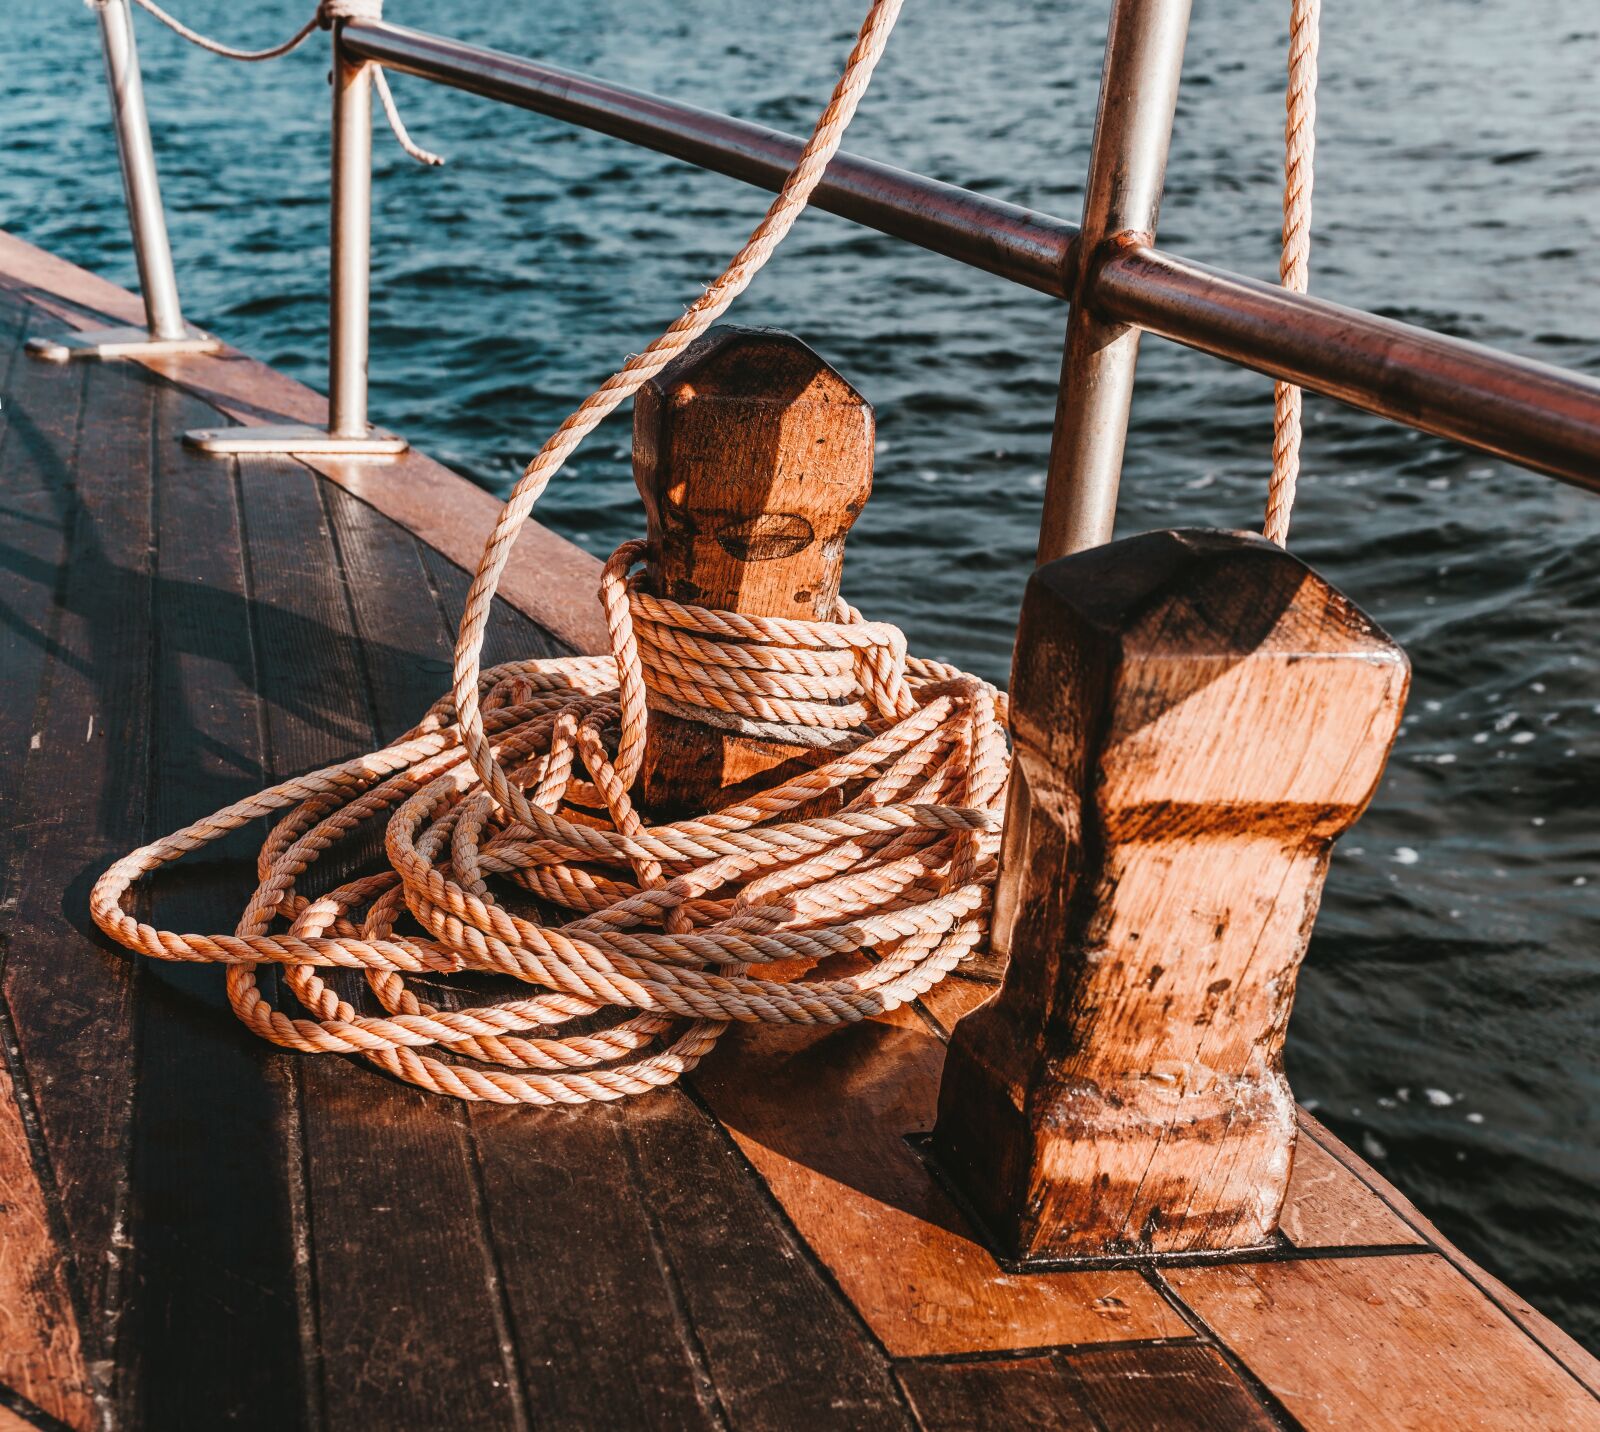 Sony a6300 sample photo. Sailing vessel, ropes, thaw photography